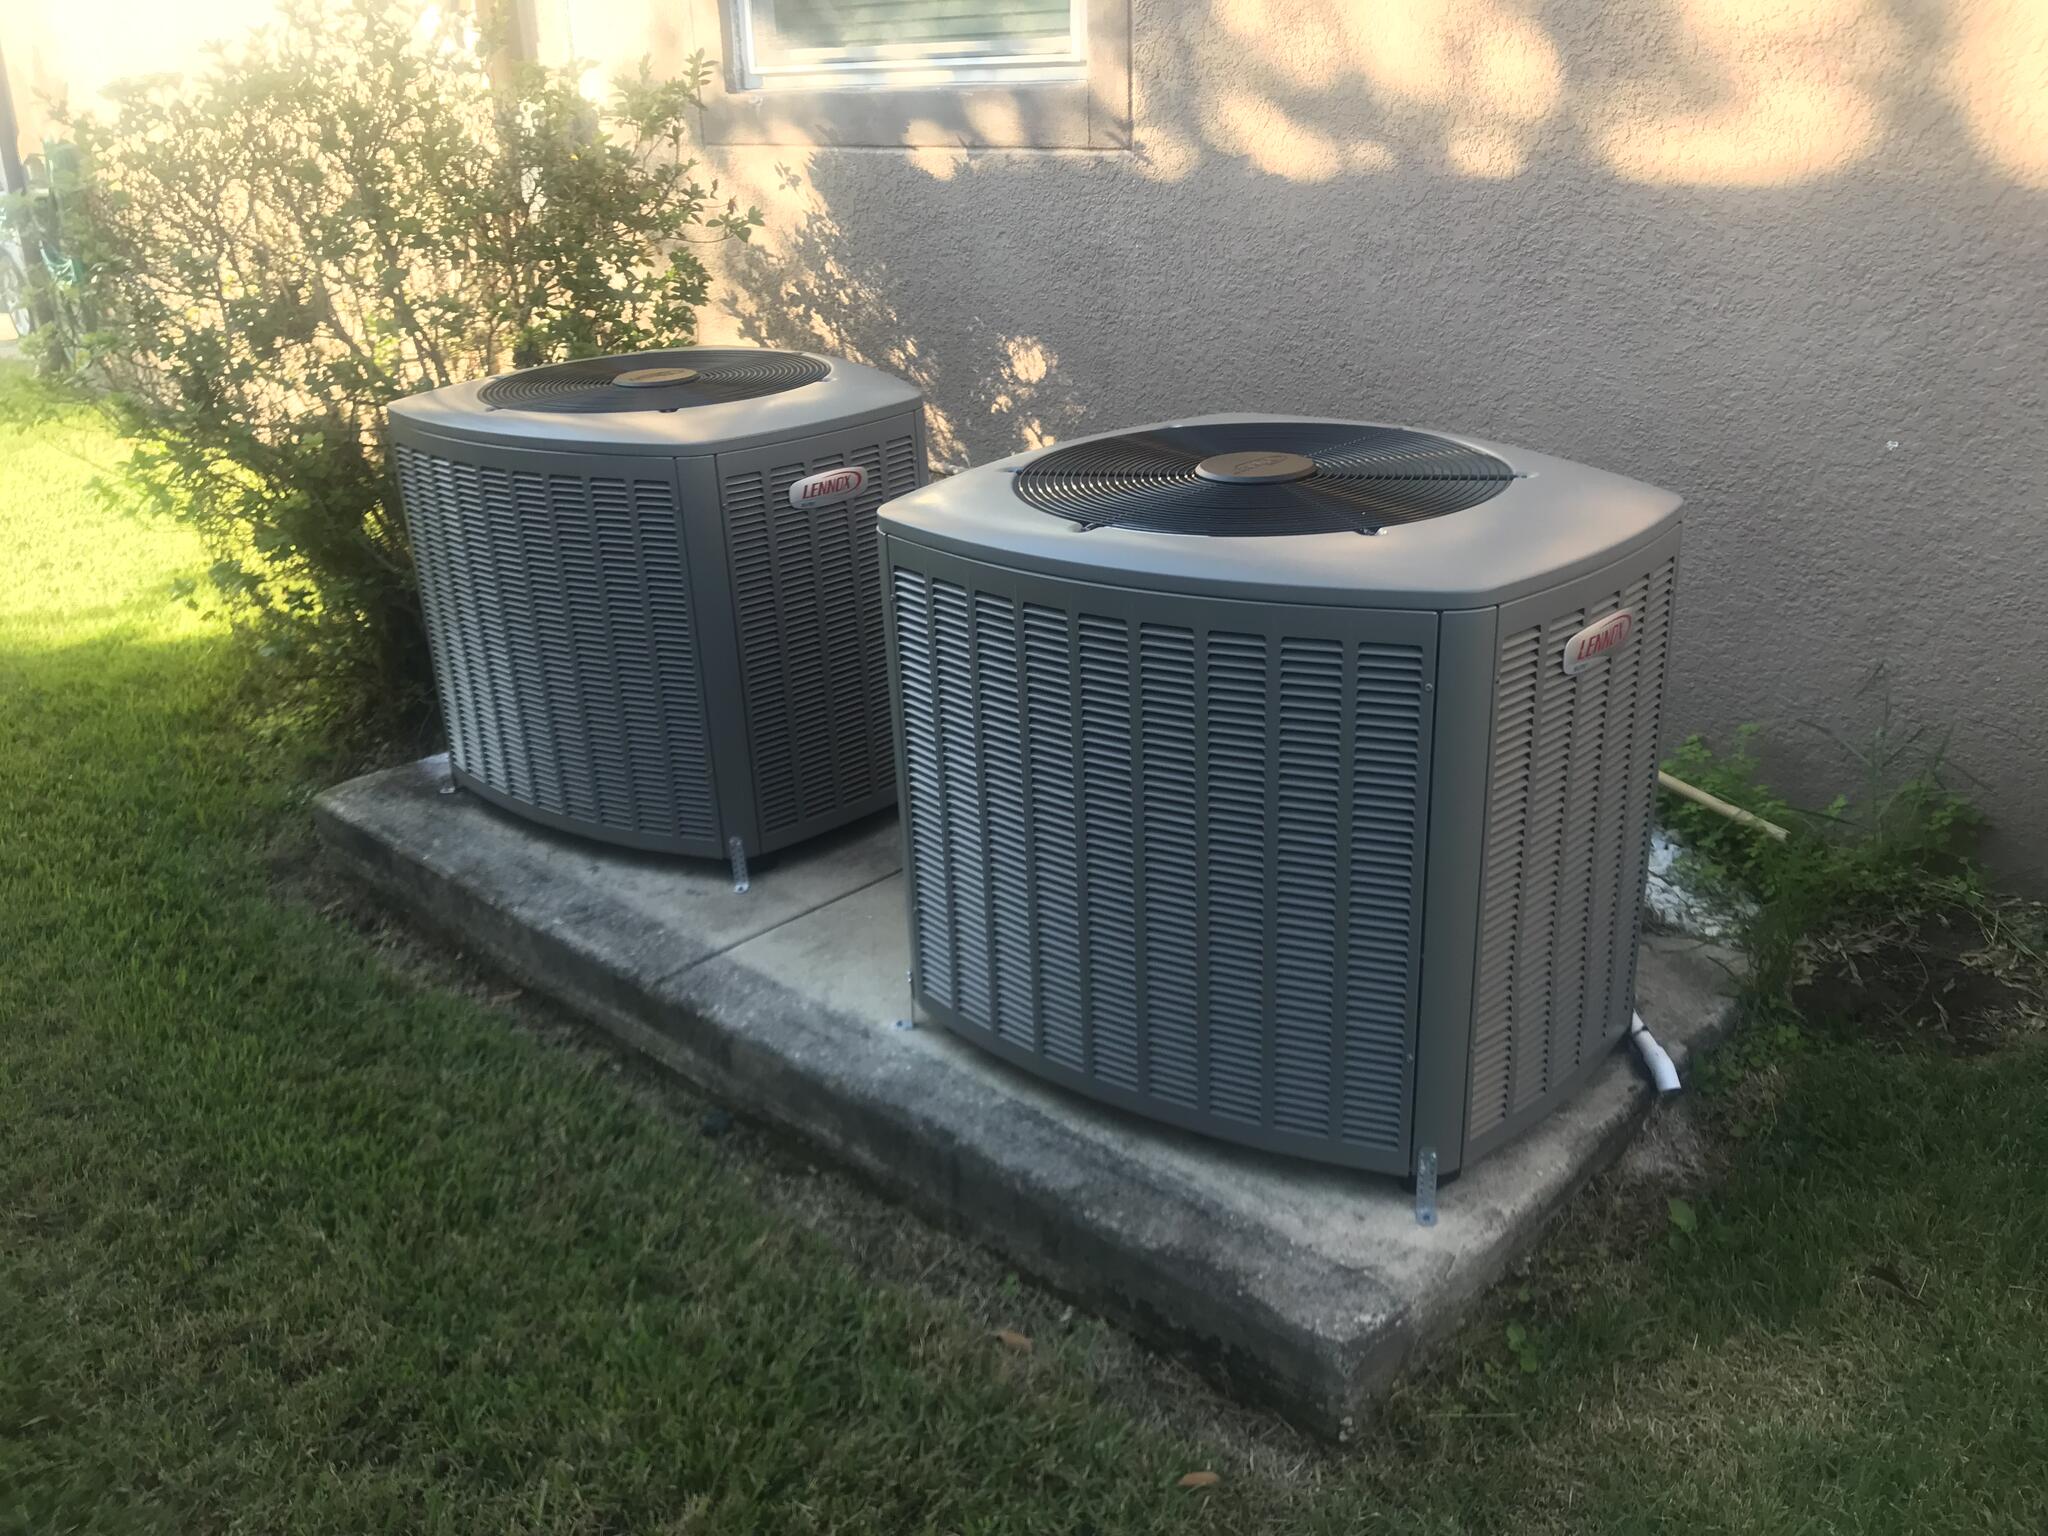 Petty Air Conditioning - 15 Recommendations - Winter Springs, FL ...